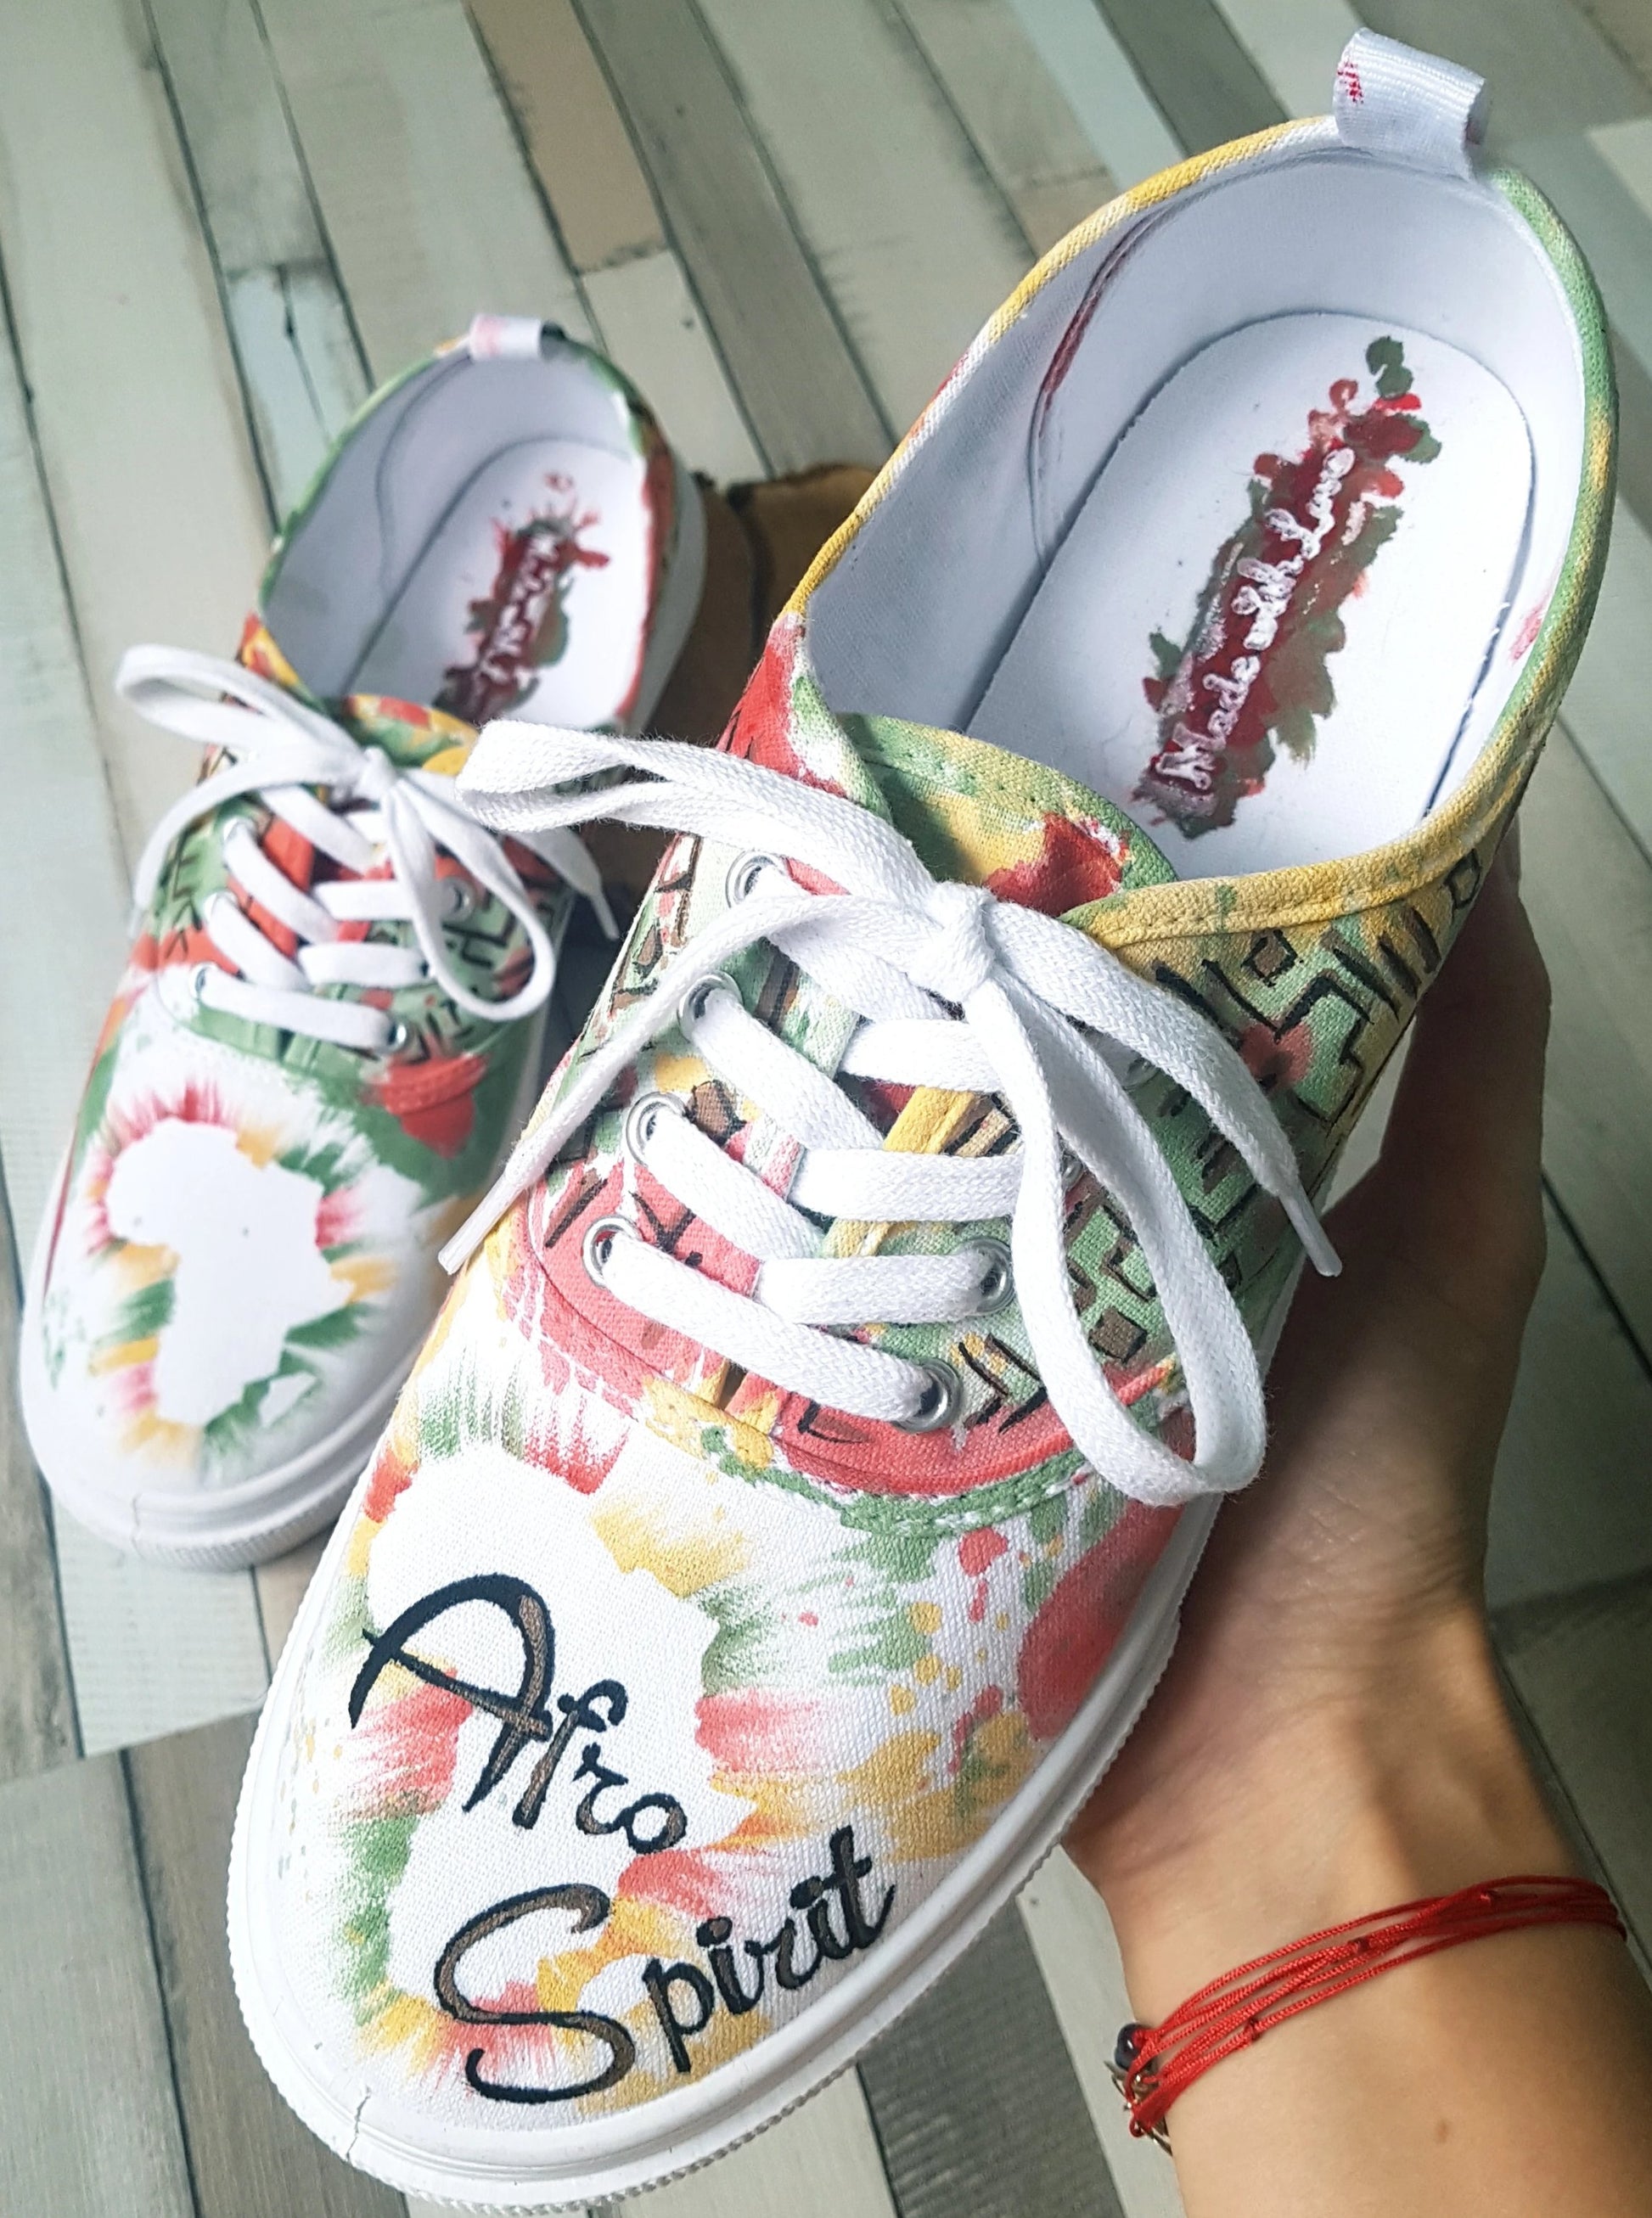 Tenisi Pictati, Painted Sneakers, Pictura Manuala Tenisi, handmade shoes, Everyday shoes, Woman Fashion, customized shoes, African model, Afro Spirit